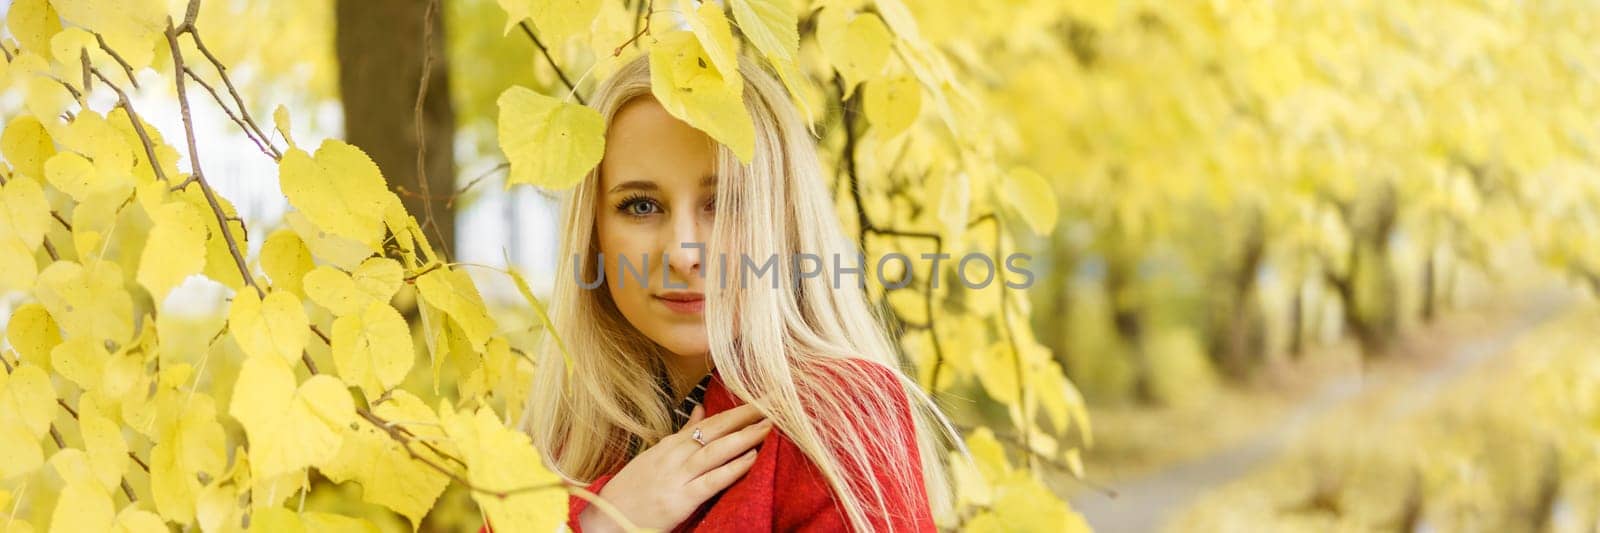 A young blonde woman walks around the autumn city in a red coat. The concept of urban style and lifestyle.